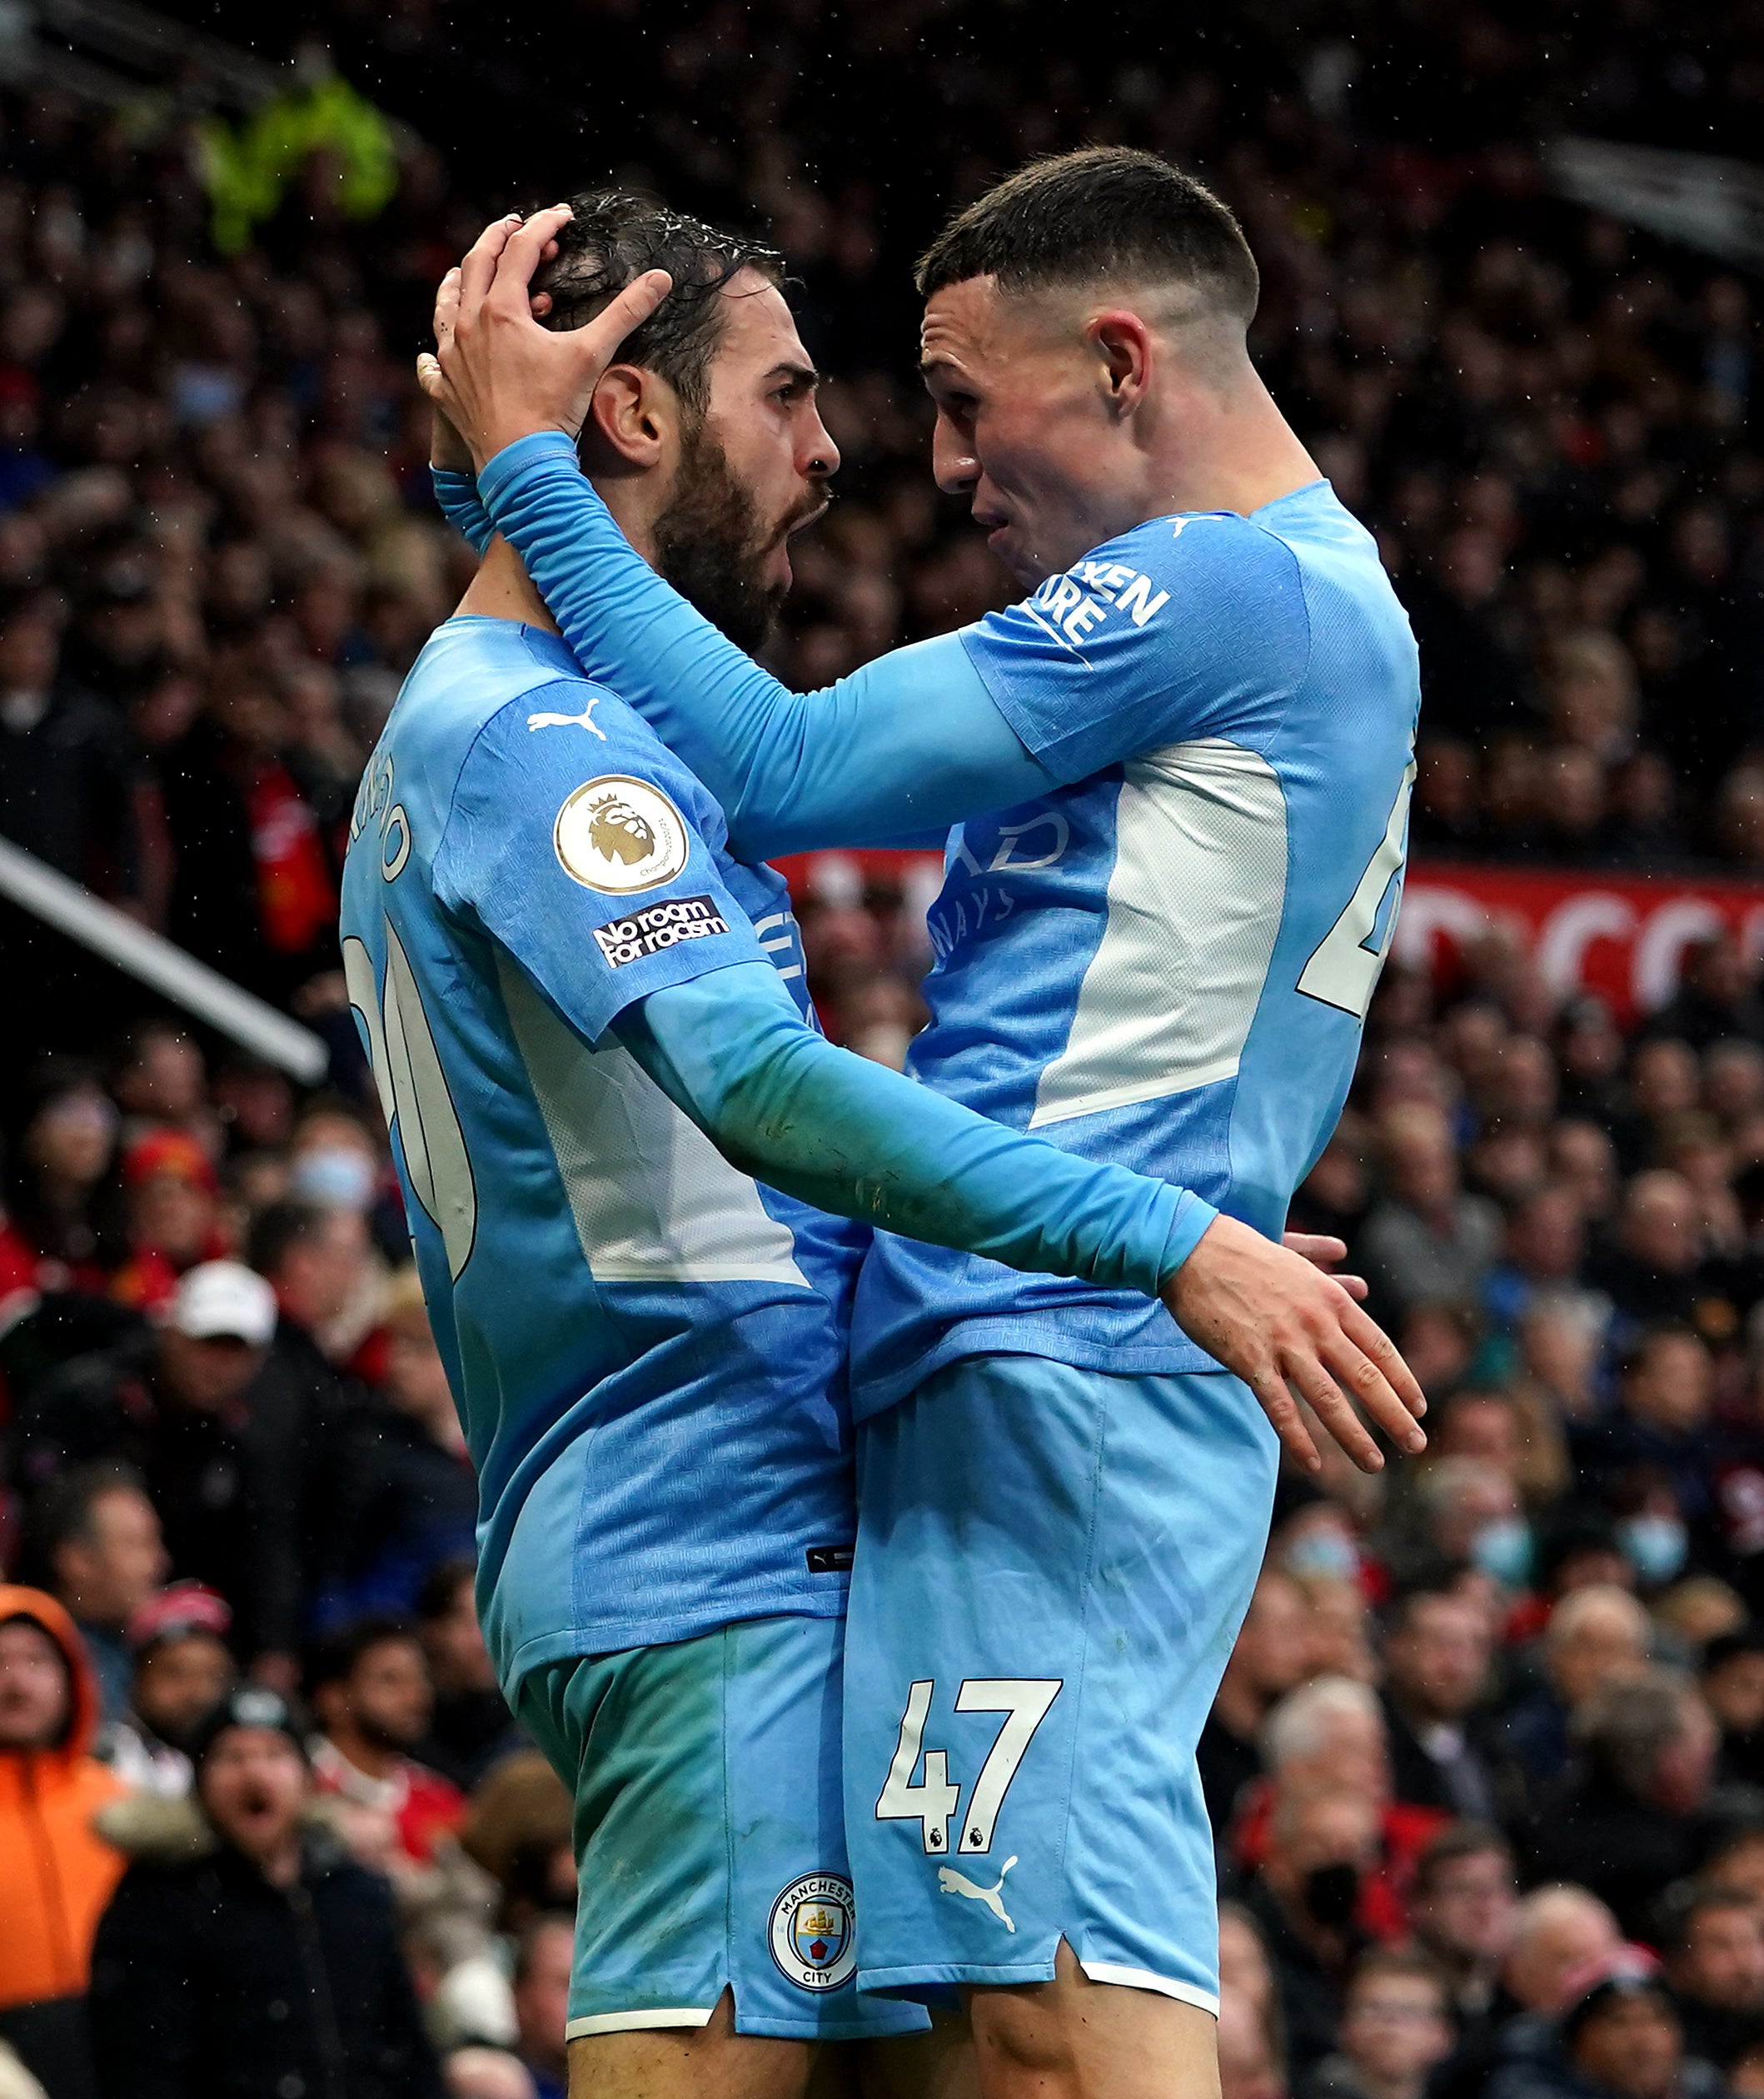 Bernardo Silva celebrates with Phil Foden after scoring Manchester City’s second goal at Old Trafford (Martin Rickett/PA)